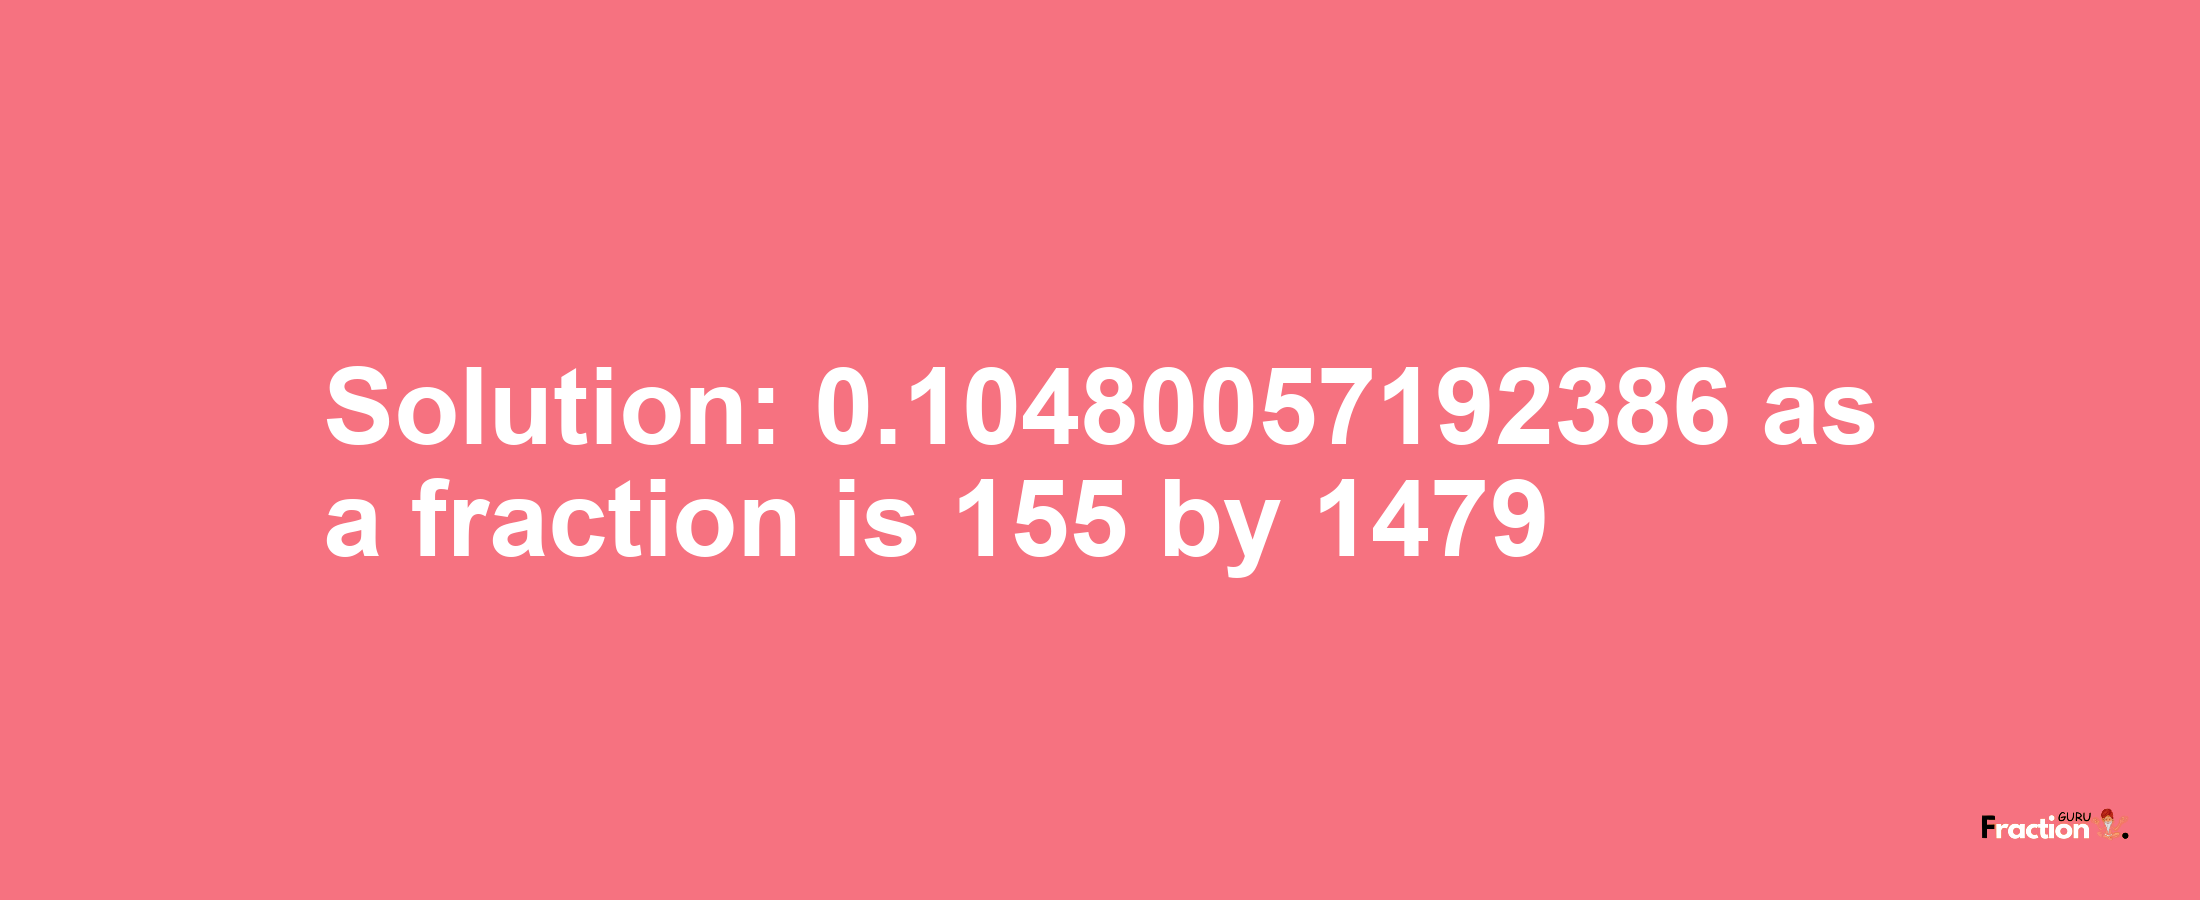 Solution:0.10480057192386 as a fraction is 155/1479